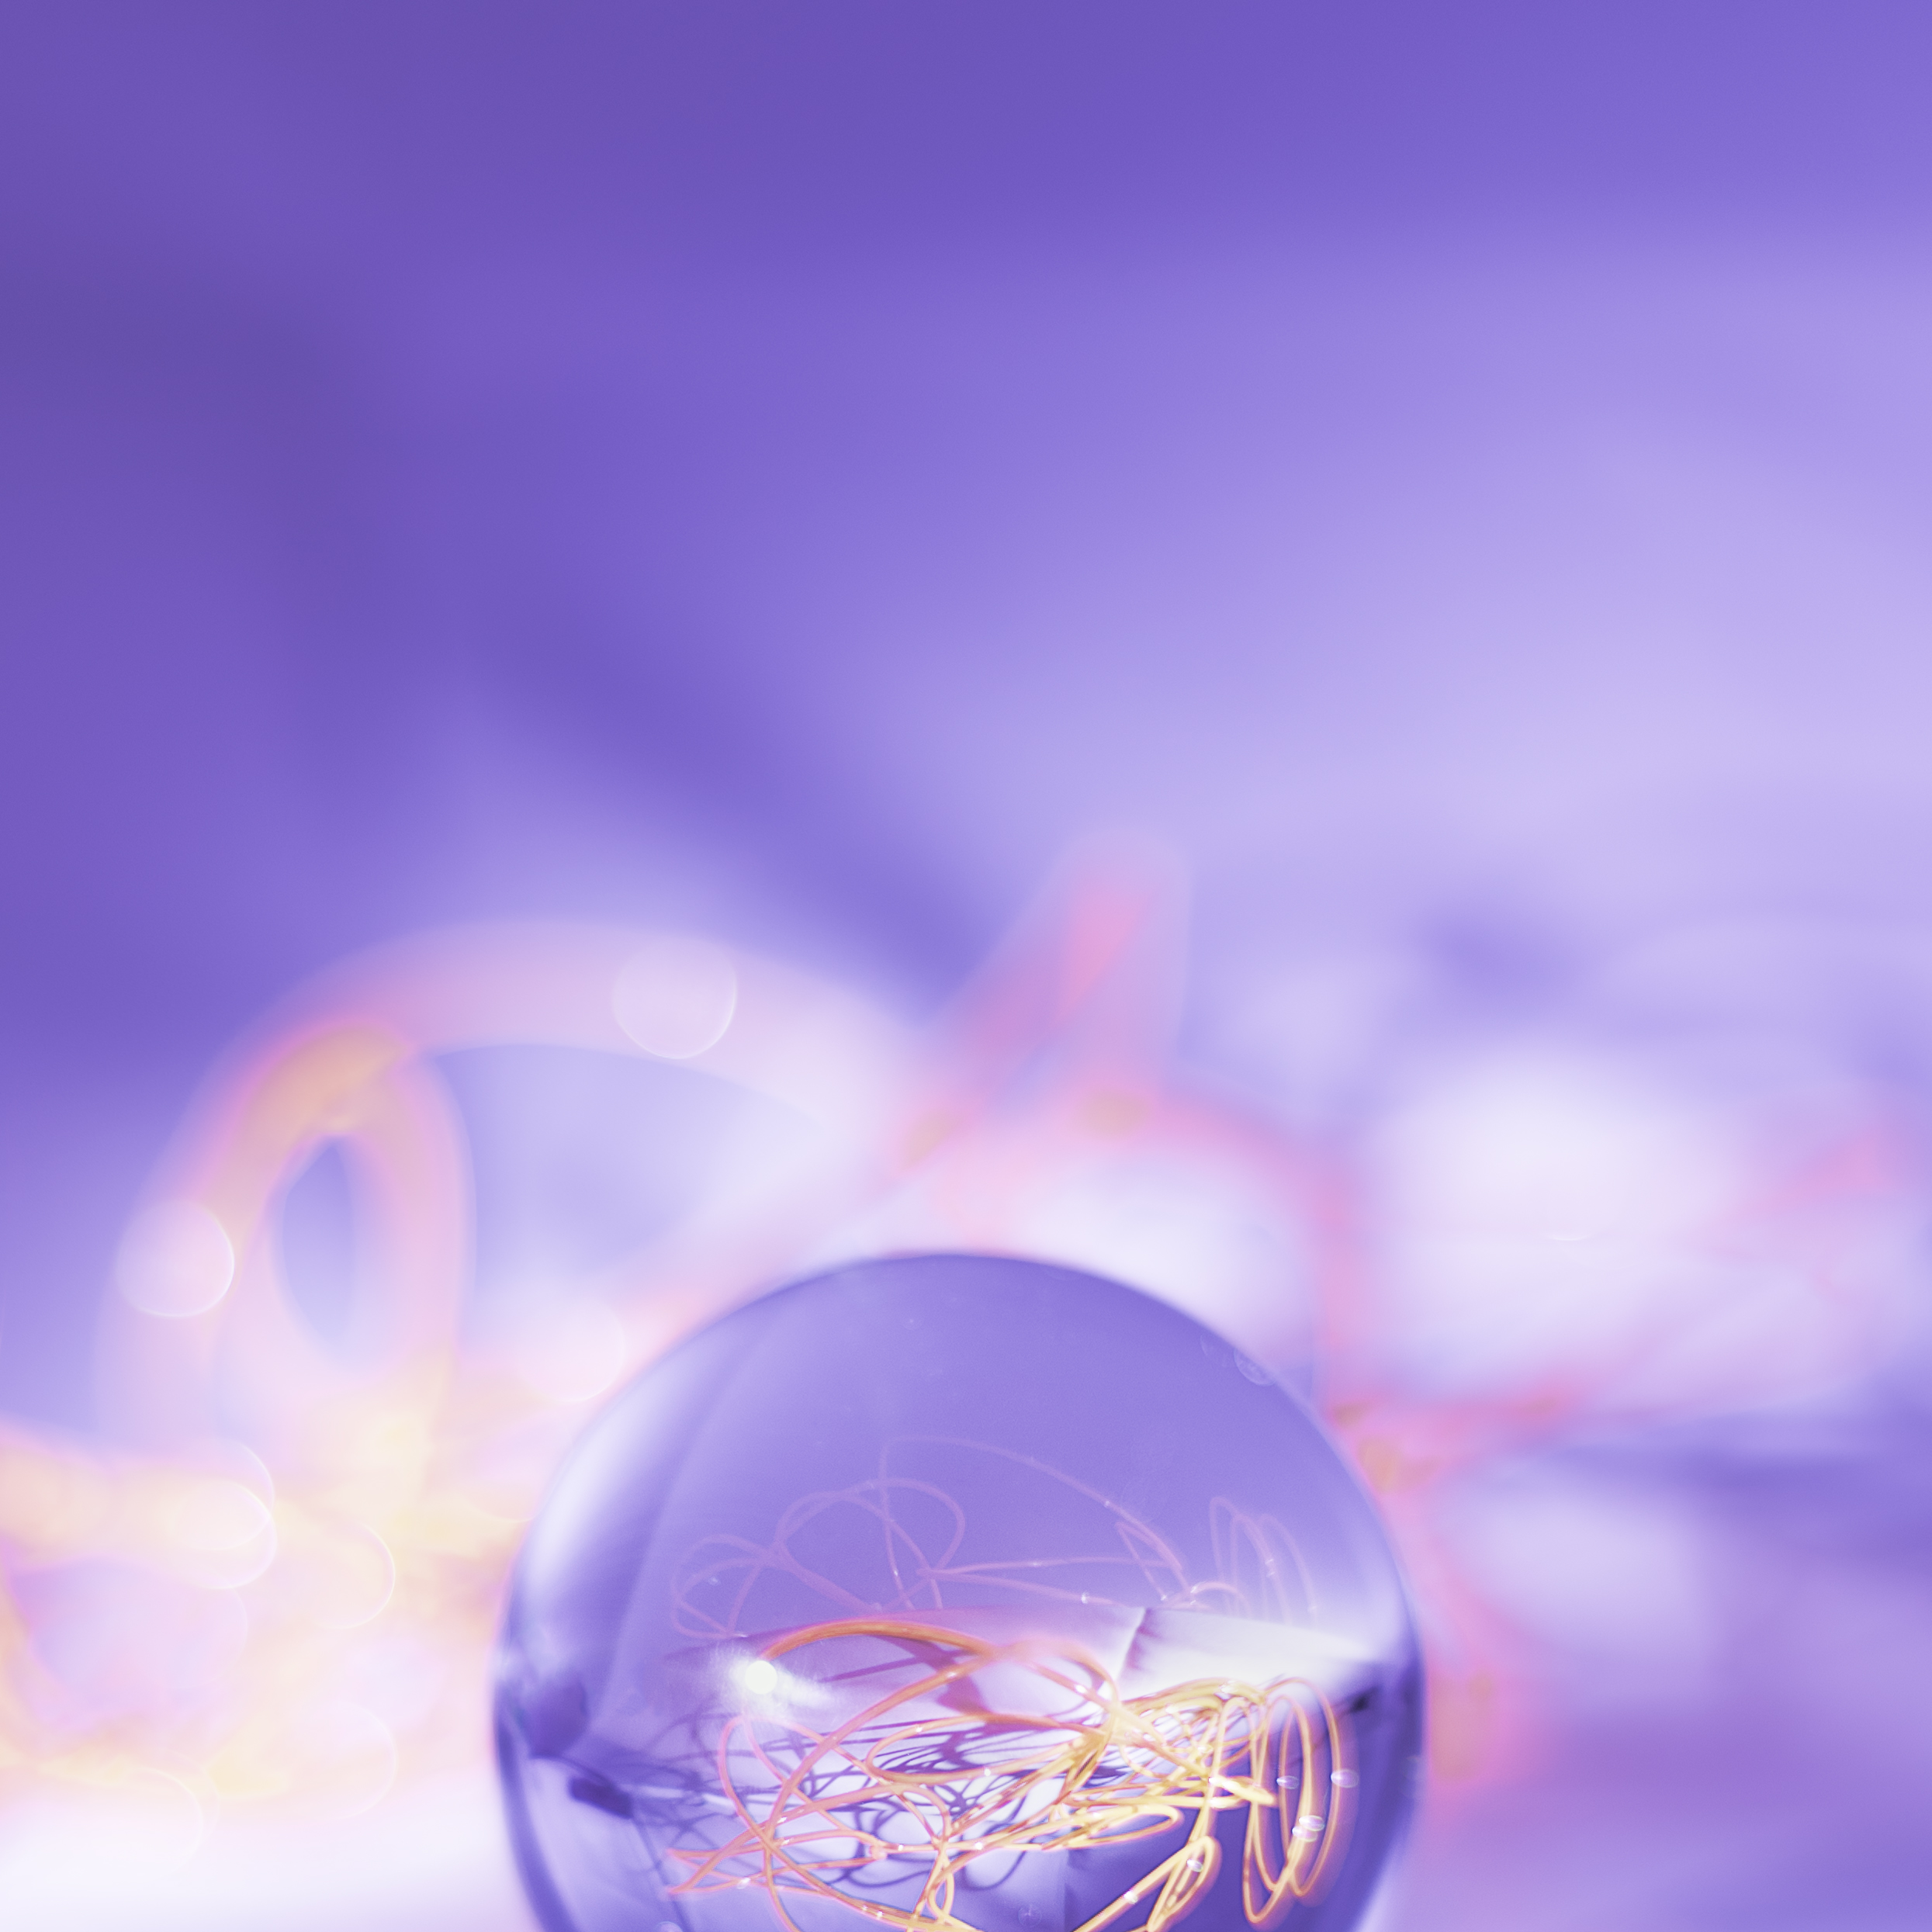 crystal, ball, purple, violet, reflection, macro for android